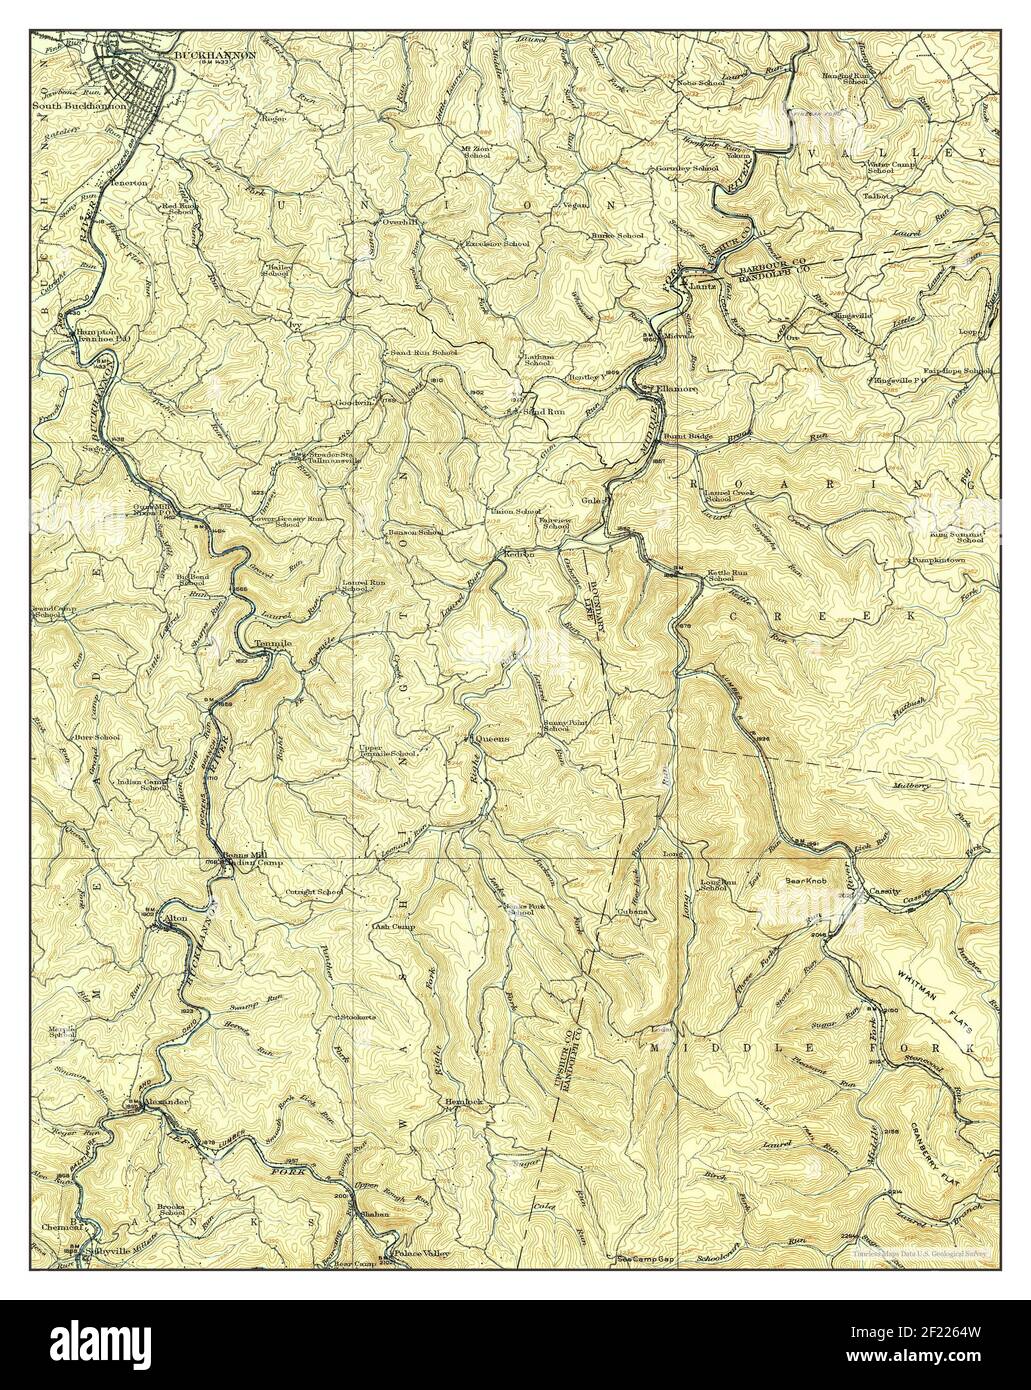 Sago, West Virginia, map 1914, 1:62500, United States of America by Timeless Maps, data U.S. Geological Survey Stock Photo